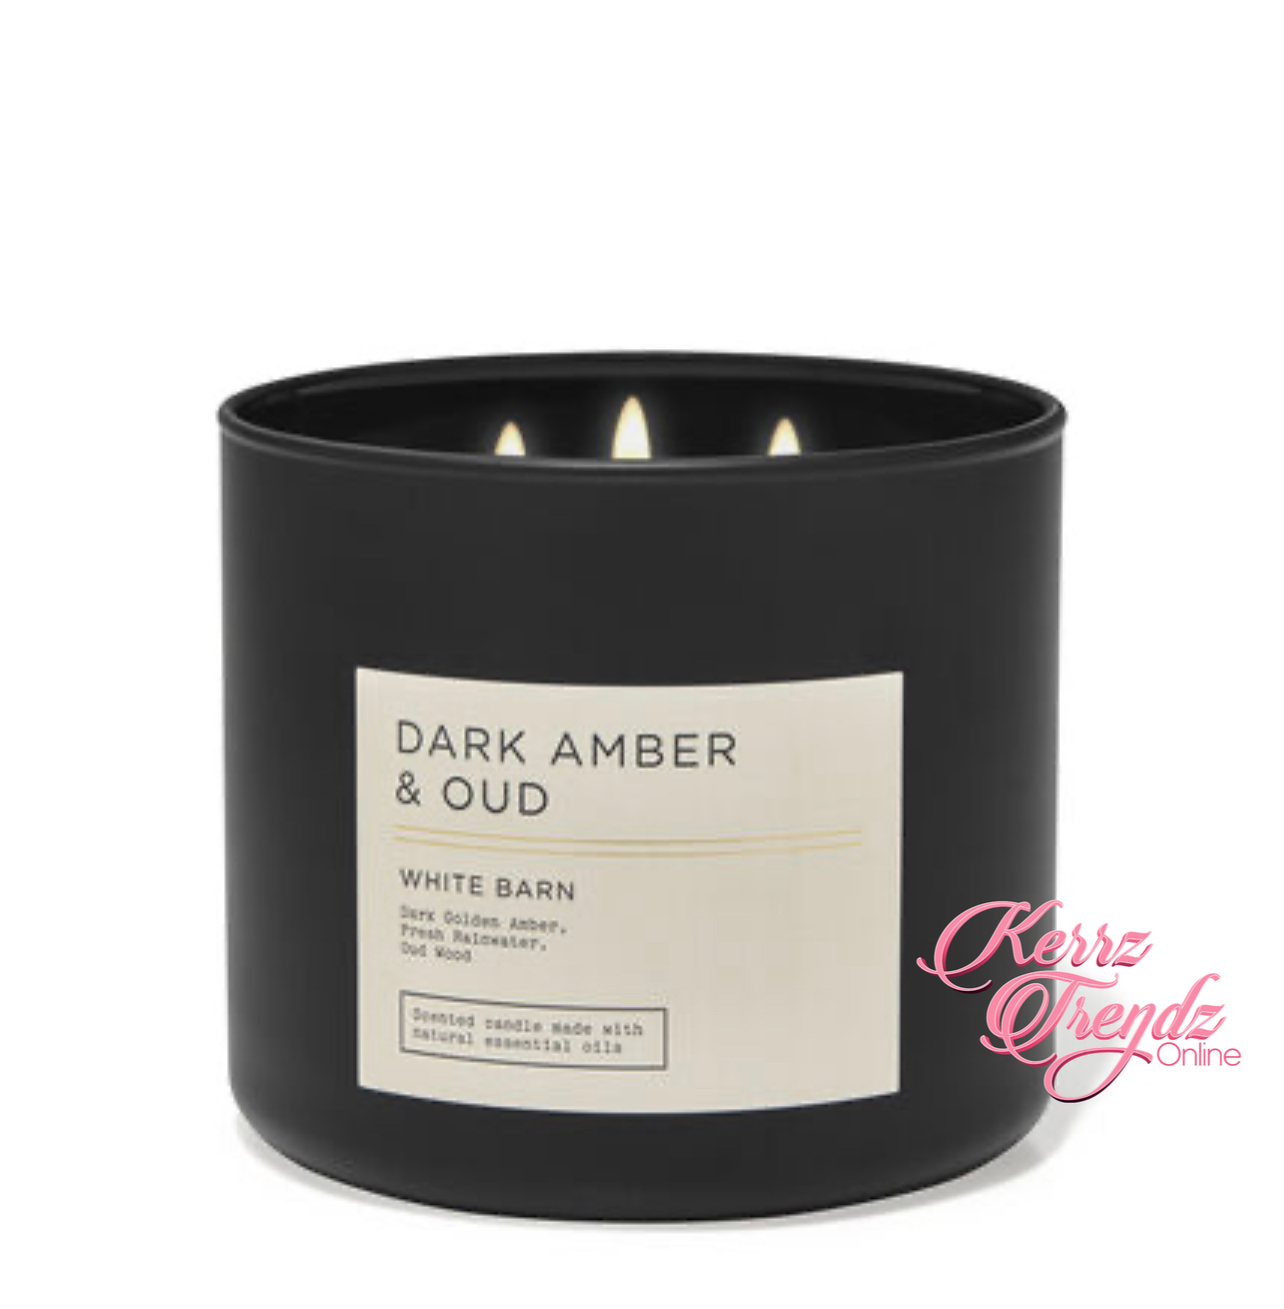 Dark Amber & Oud 3-wick Candle